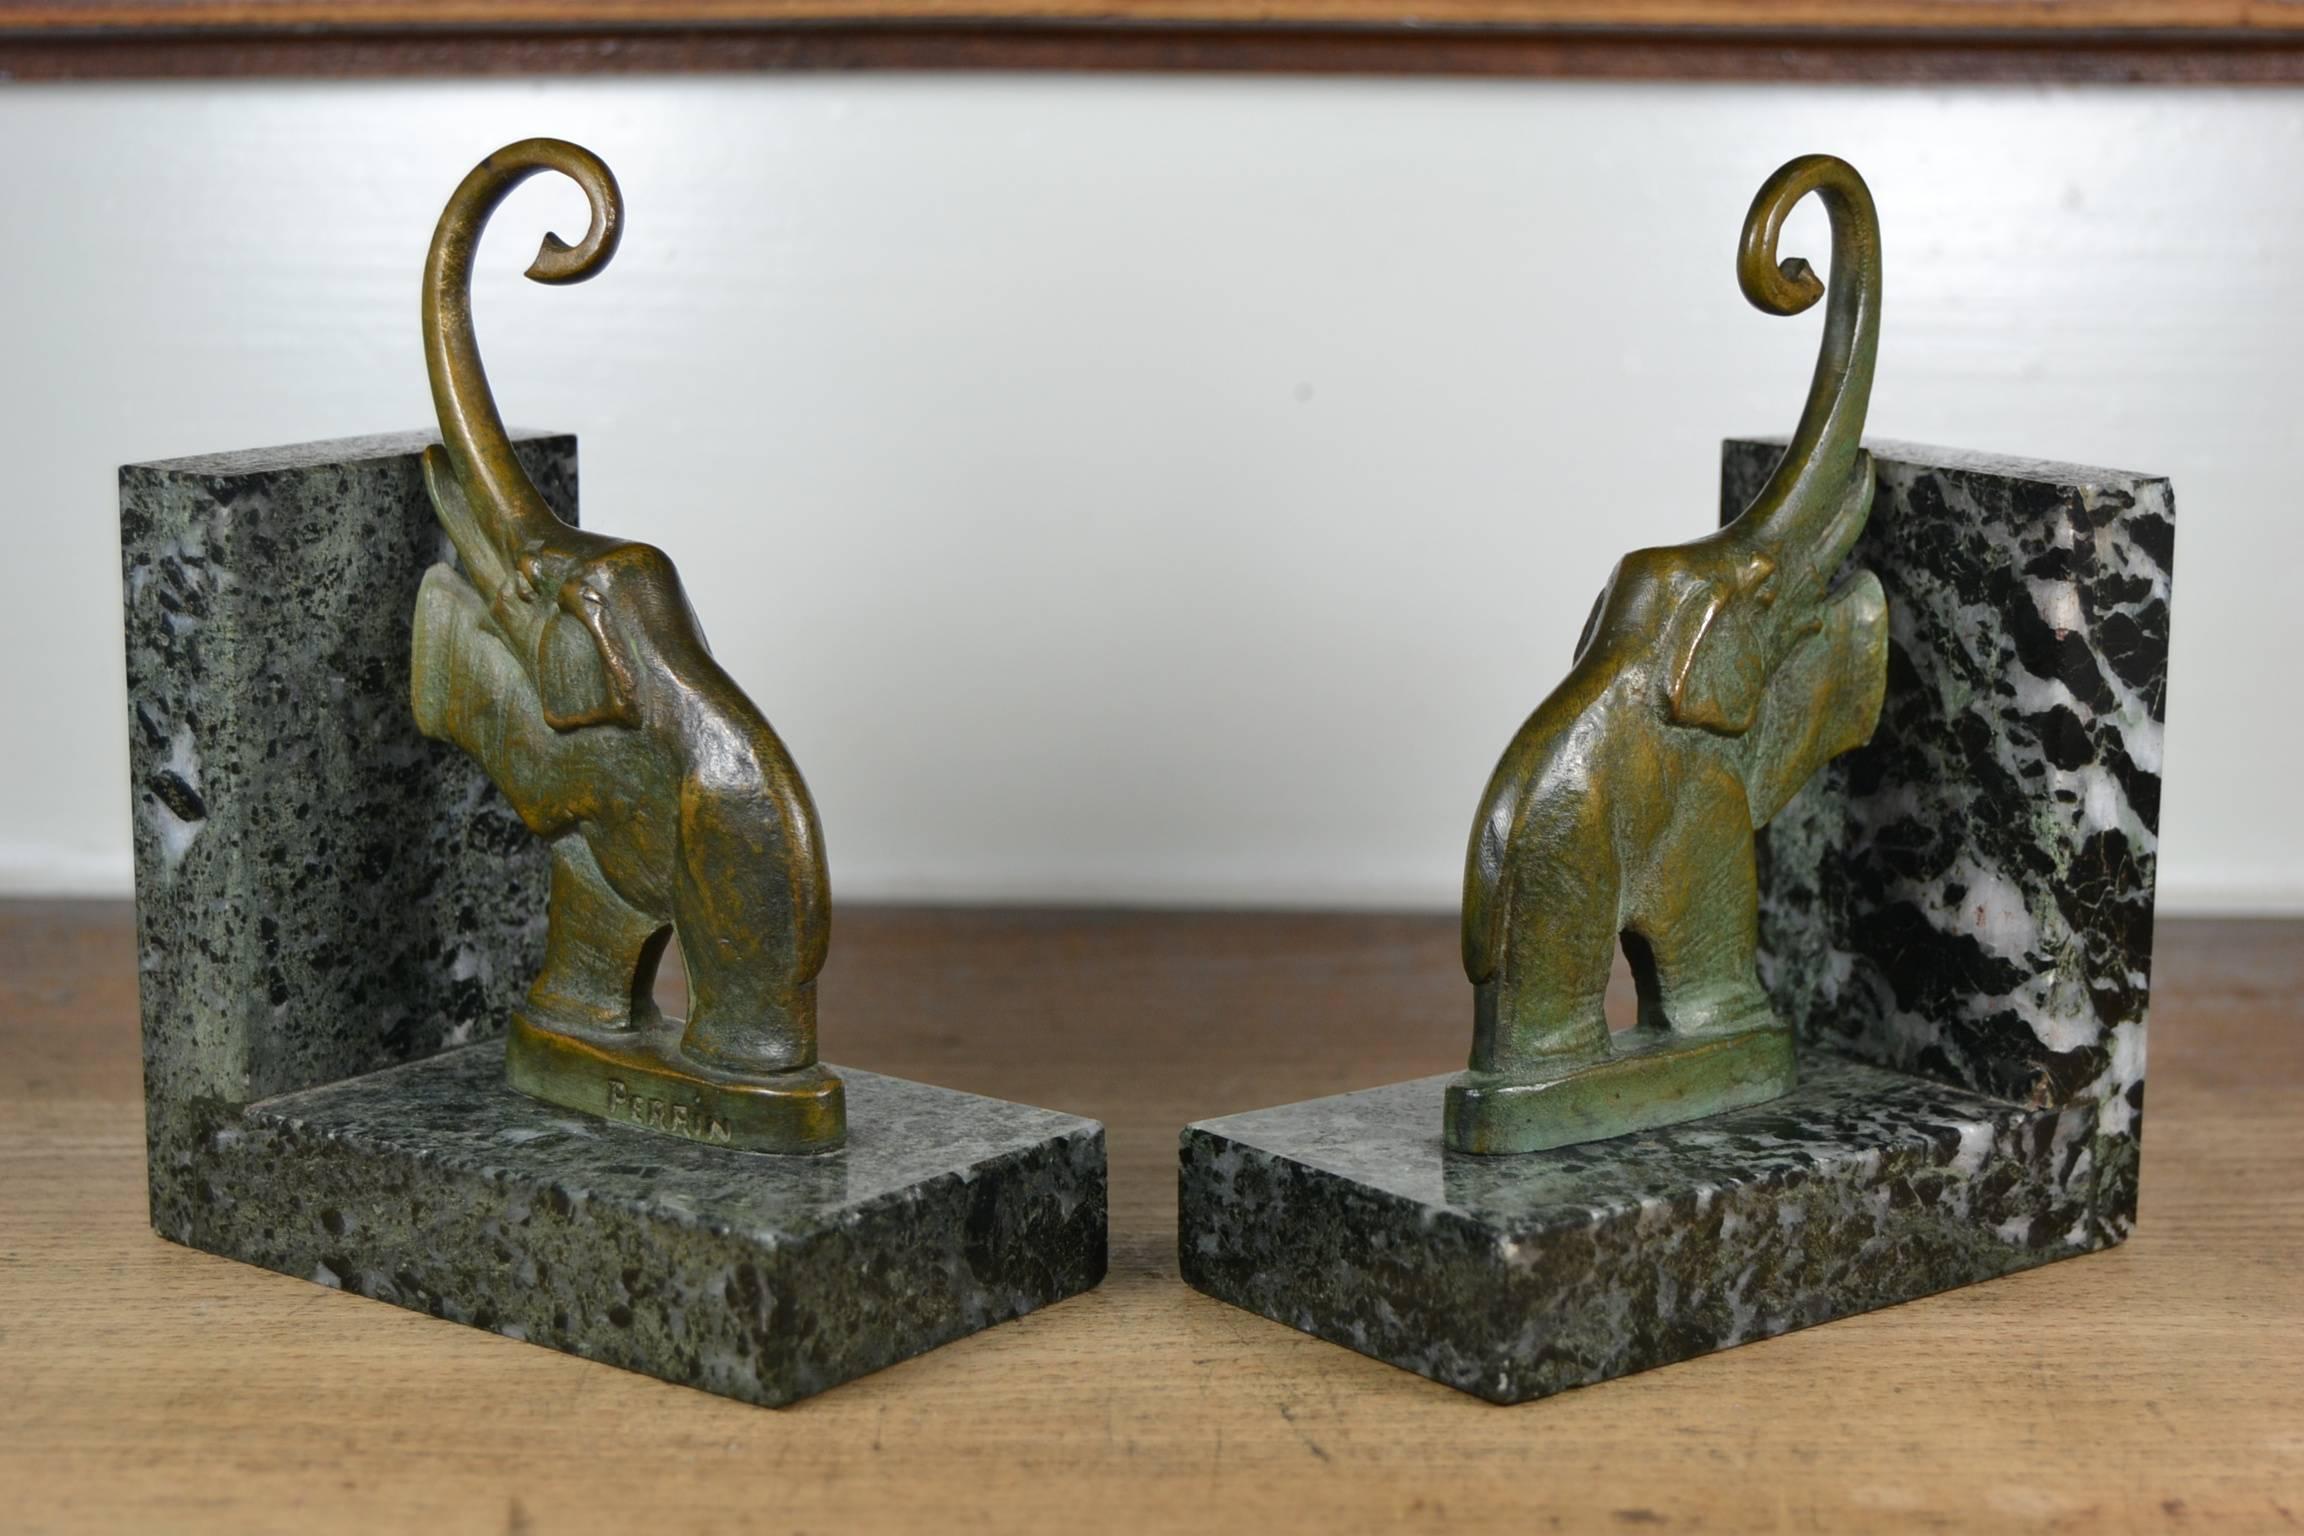 French, Art Deco Elephant Bookends 1